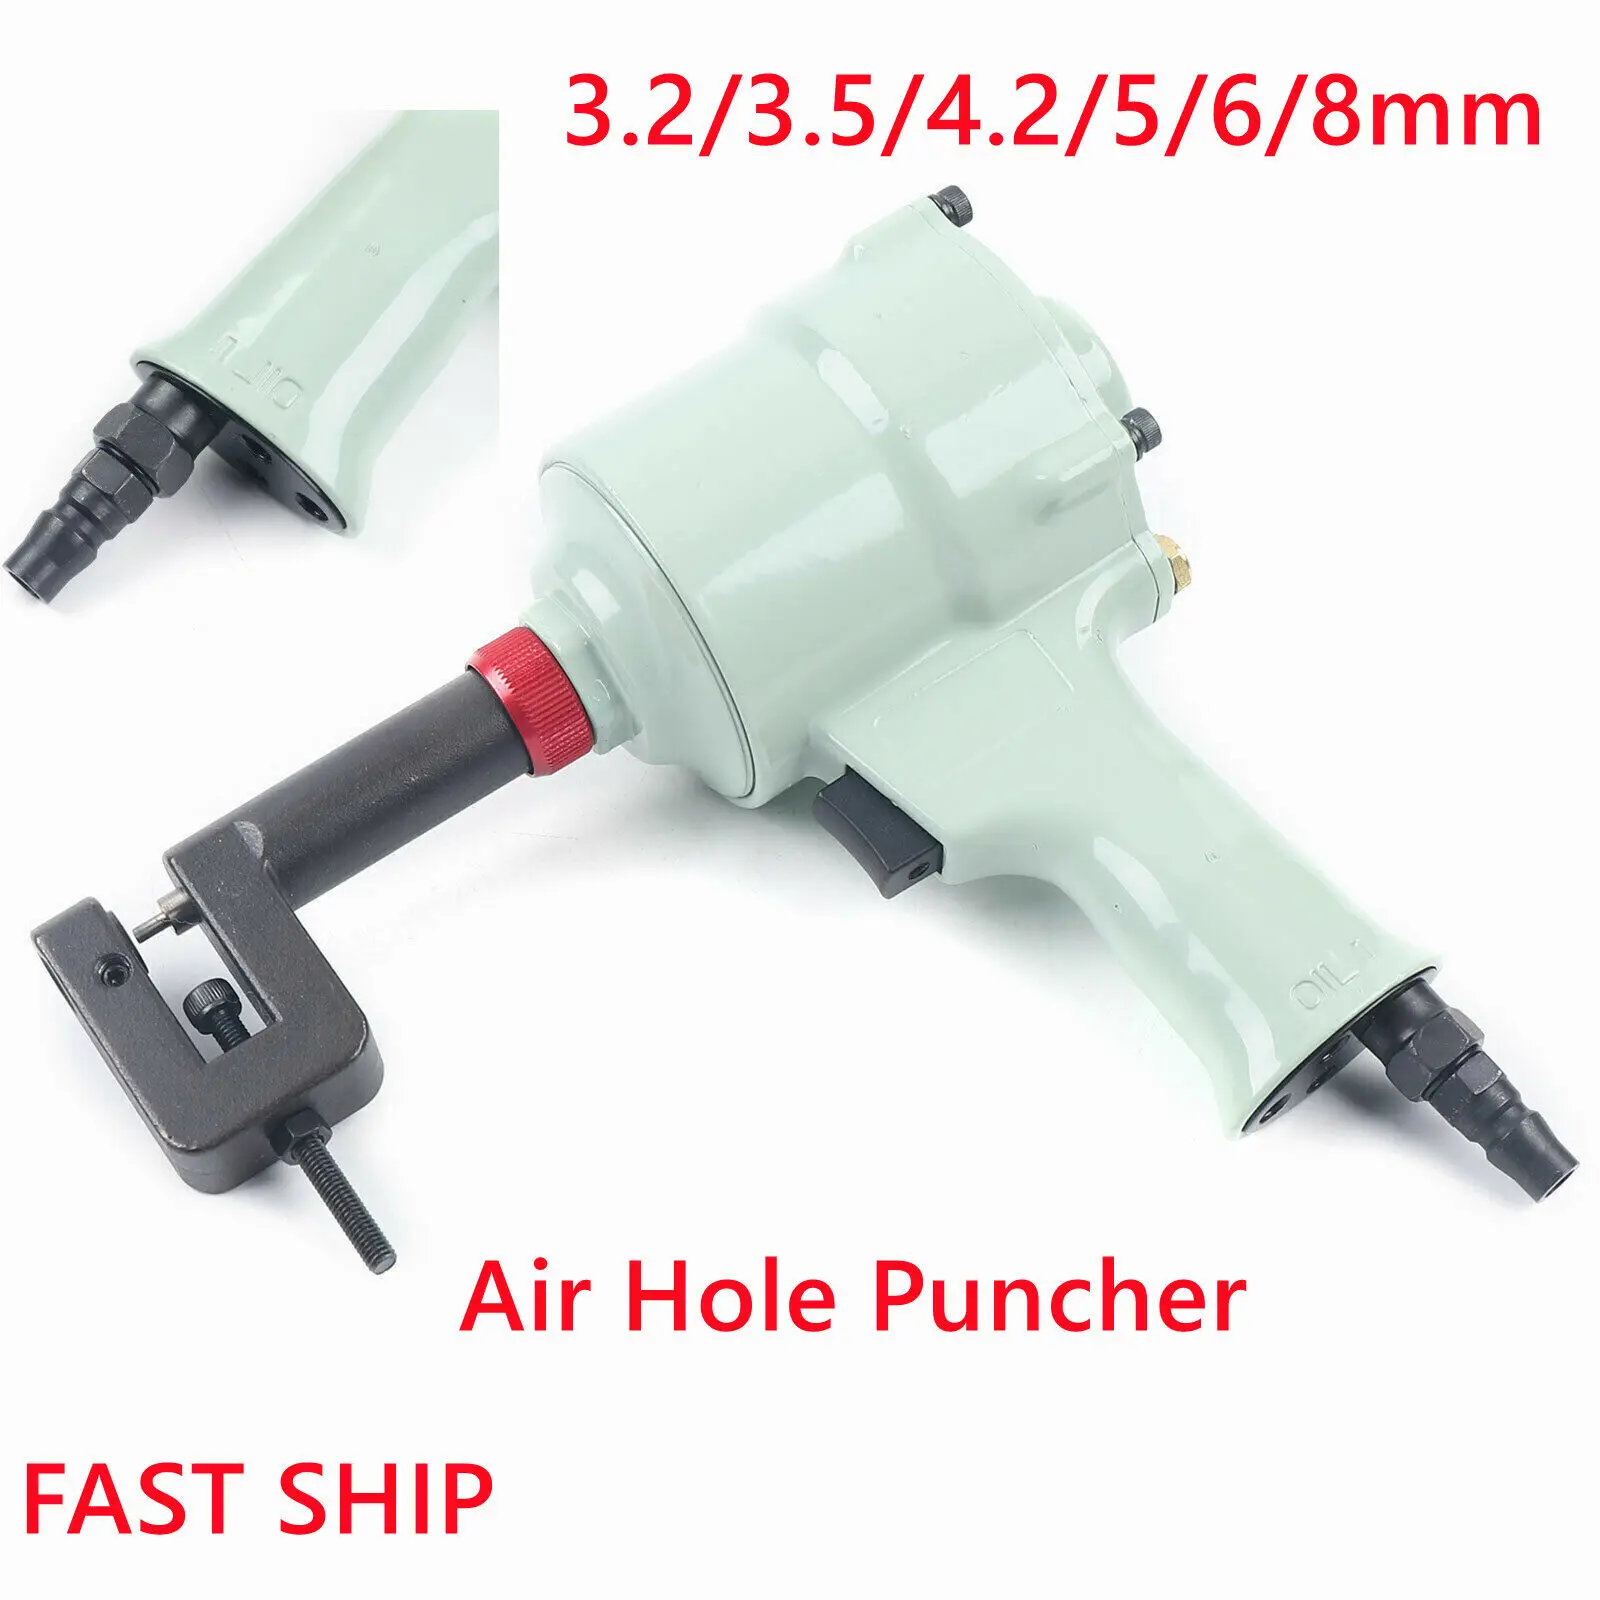 Puncher Pneumatic Air Hole Punch Sharp Panel Straight Hole Punch Tool 708kg Shear 6mm Advertising Word Tool